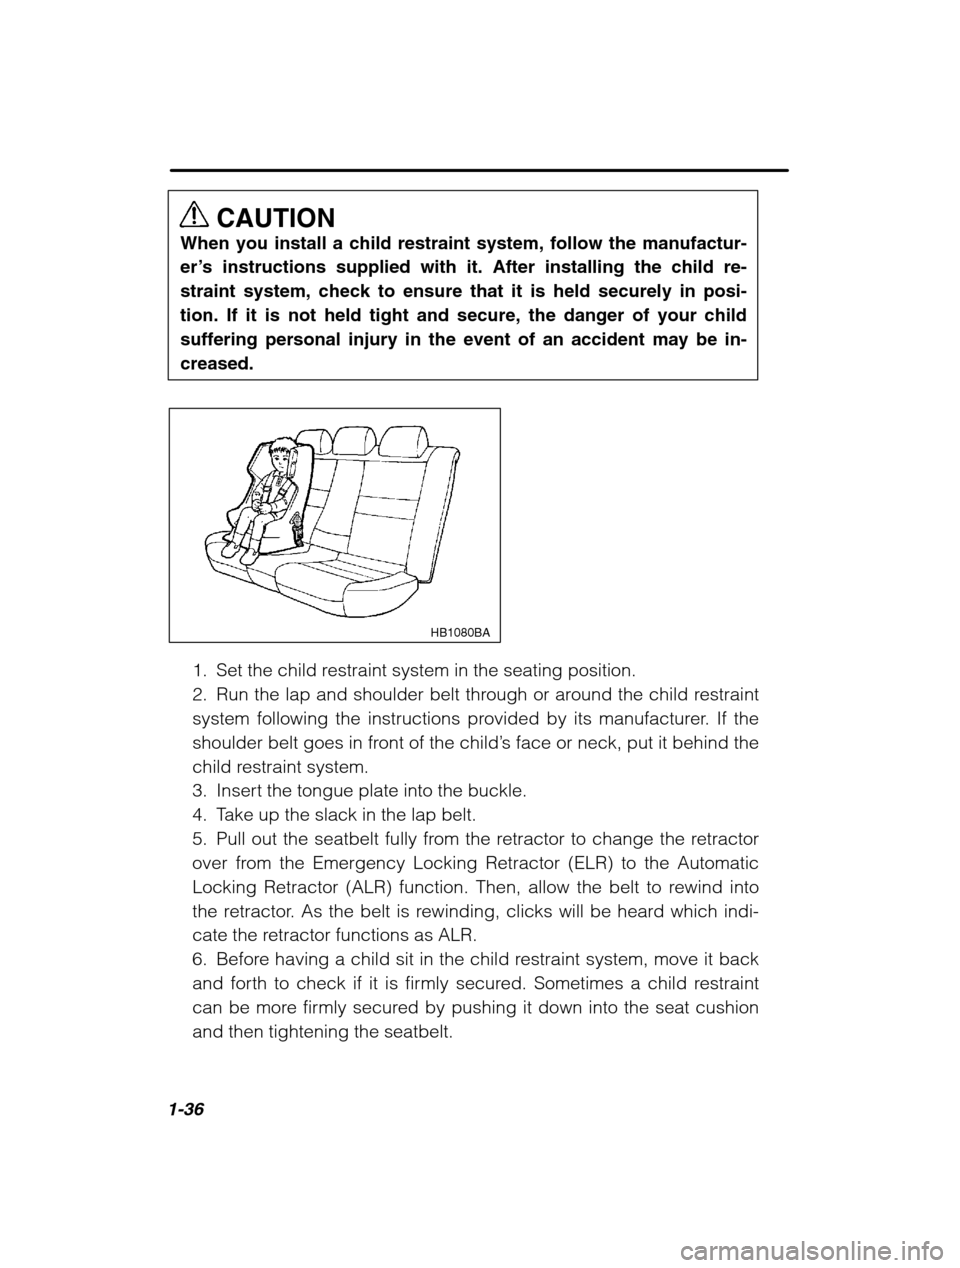 SUBARU OUTBACK 2002 3.G Owners Manual 1-36
CAUTION
When you install a child restraint system, follow the manufactur- 
er’ s instructions supplied with it. After installing the child re-
straint system, check to ensure that it is held se